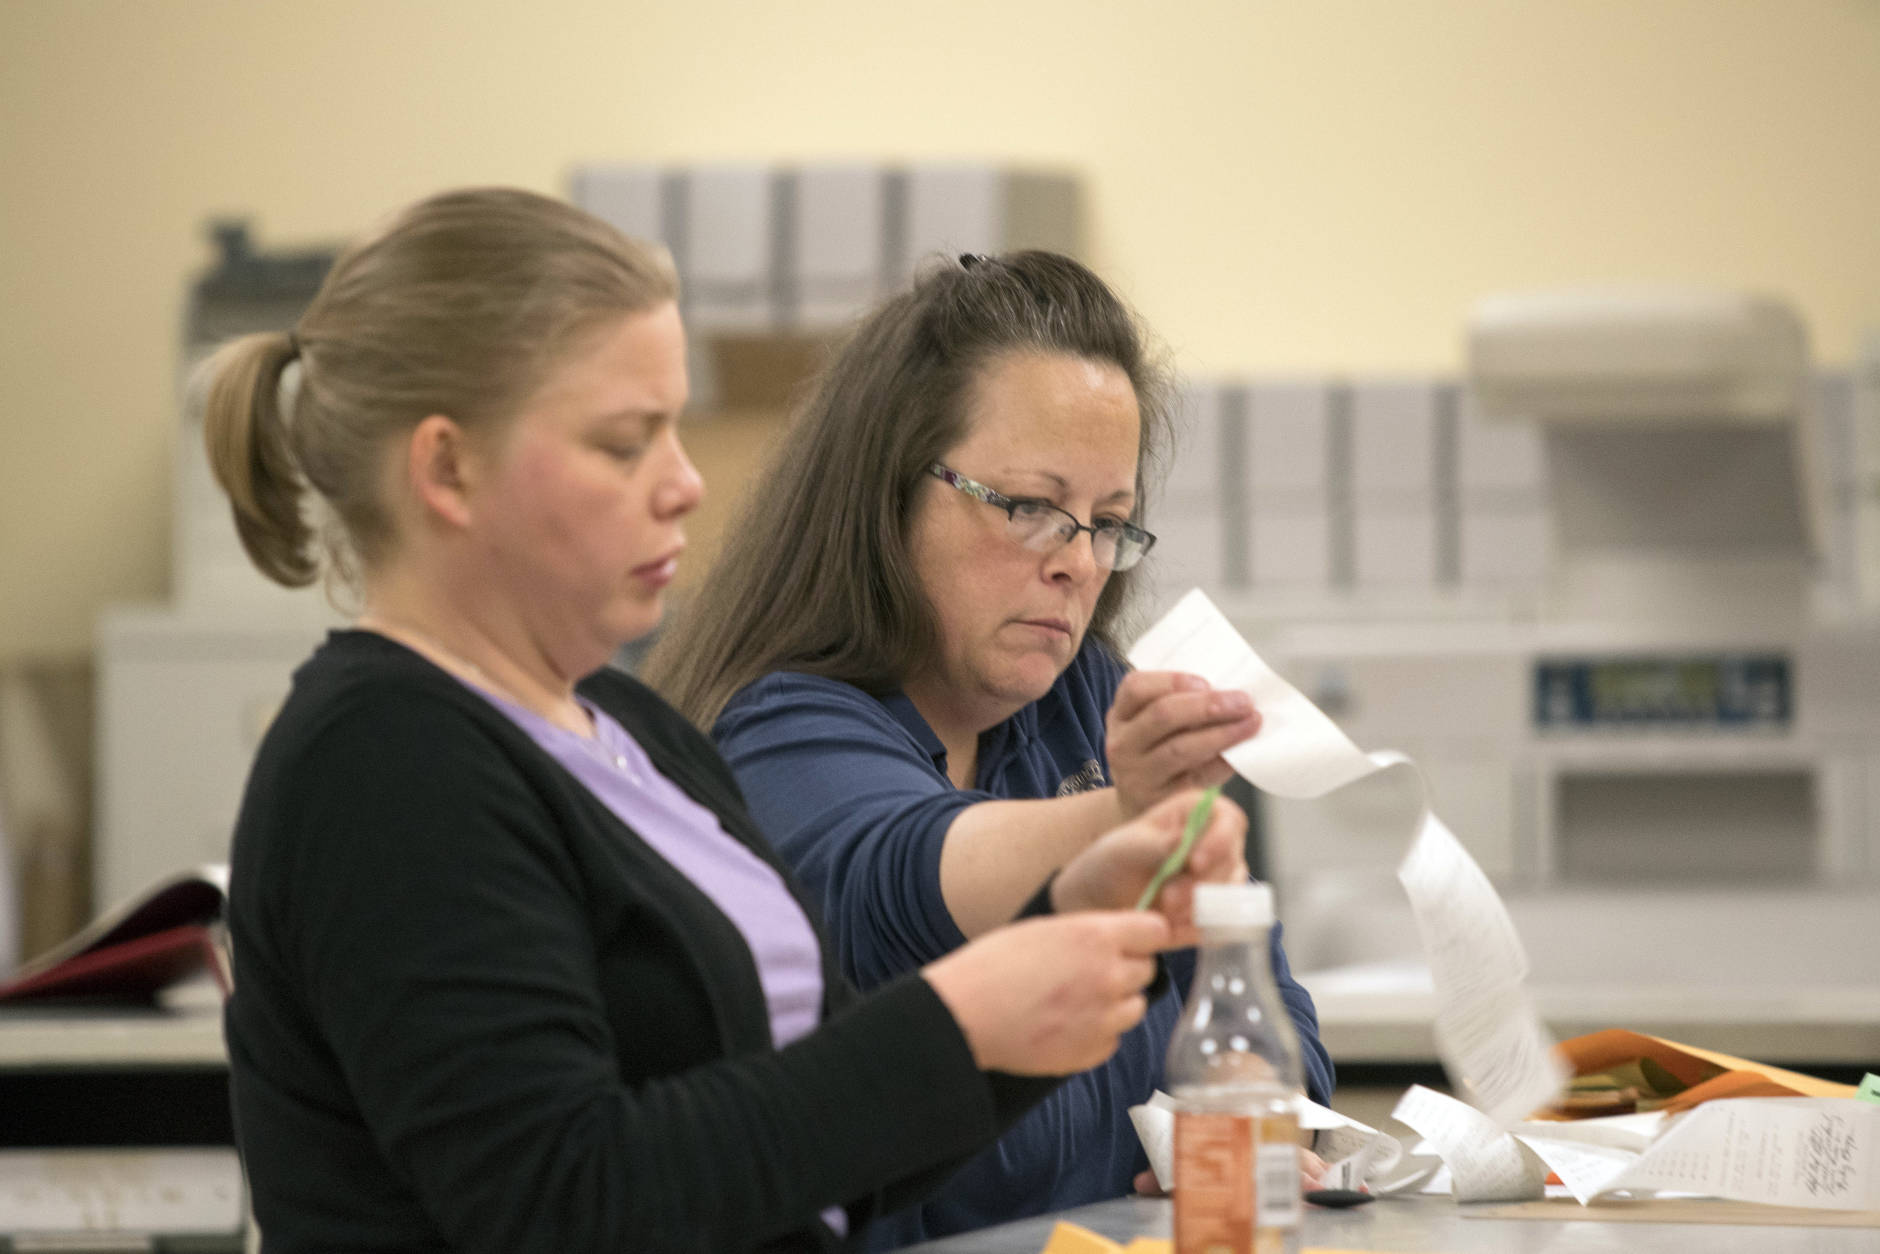 Rowan County Clerk Kim Davis, right, and County Democratic election representative Kathryn Reeder, count votes at the county courthouse Tuesday, November 8, 2016 in Morehead, Ky. Davis is the Kentucky clerk who was jailed for refusing to issue marriage licenses to gay couples.  (AP Photo/John Flavell)